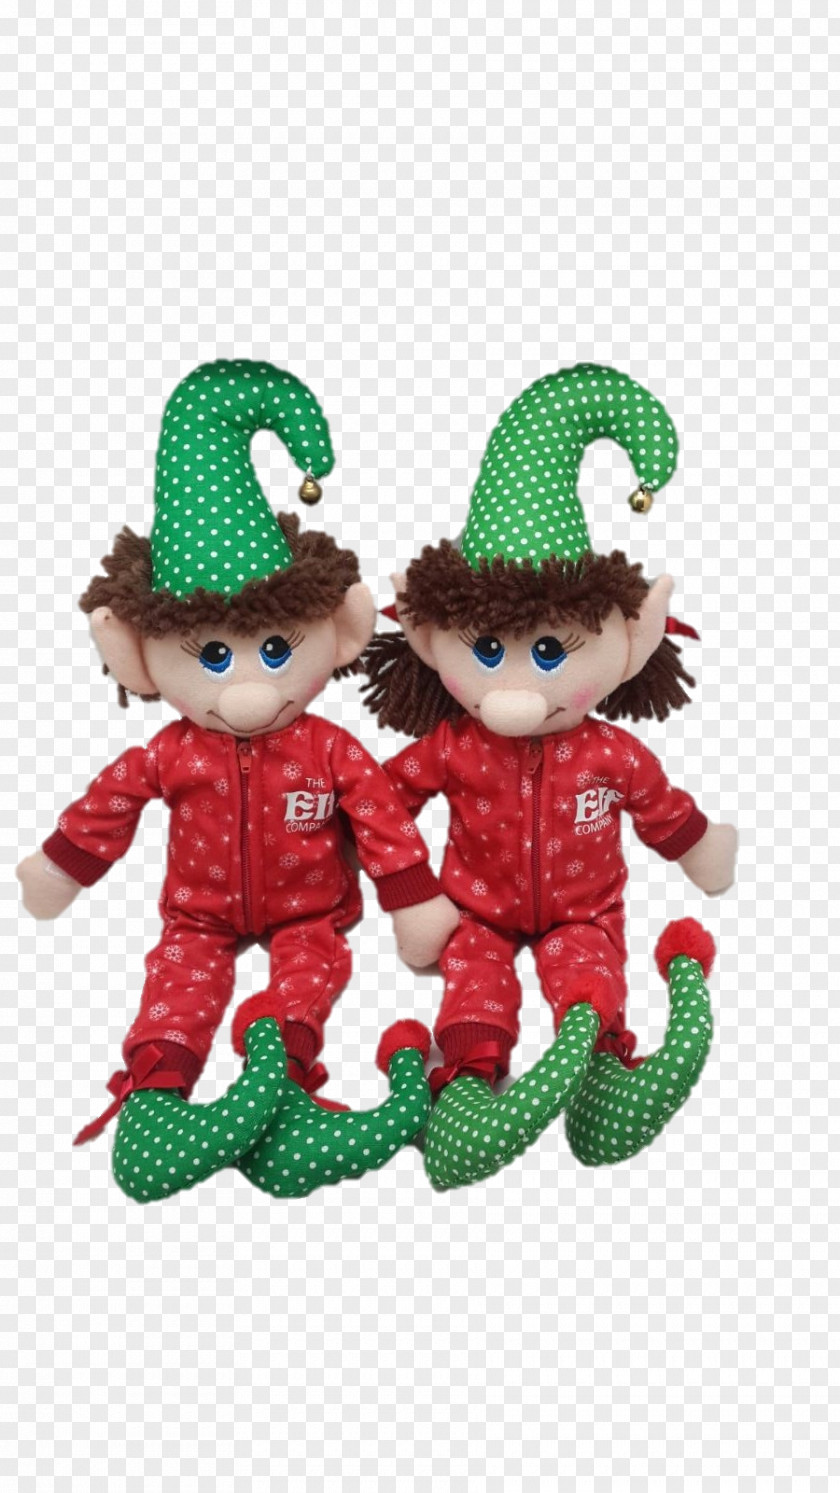 Elf On The Shelf Christmas Ornament Doll Stuffed Animals & Cuddly Toys Character PNG